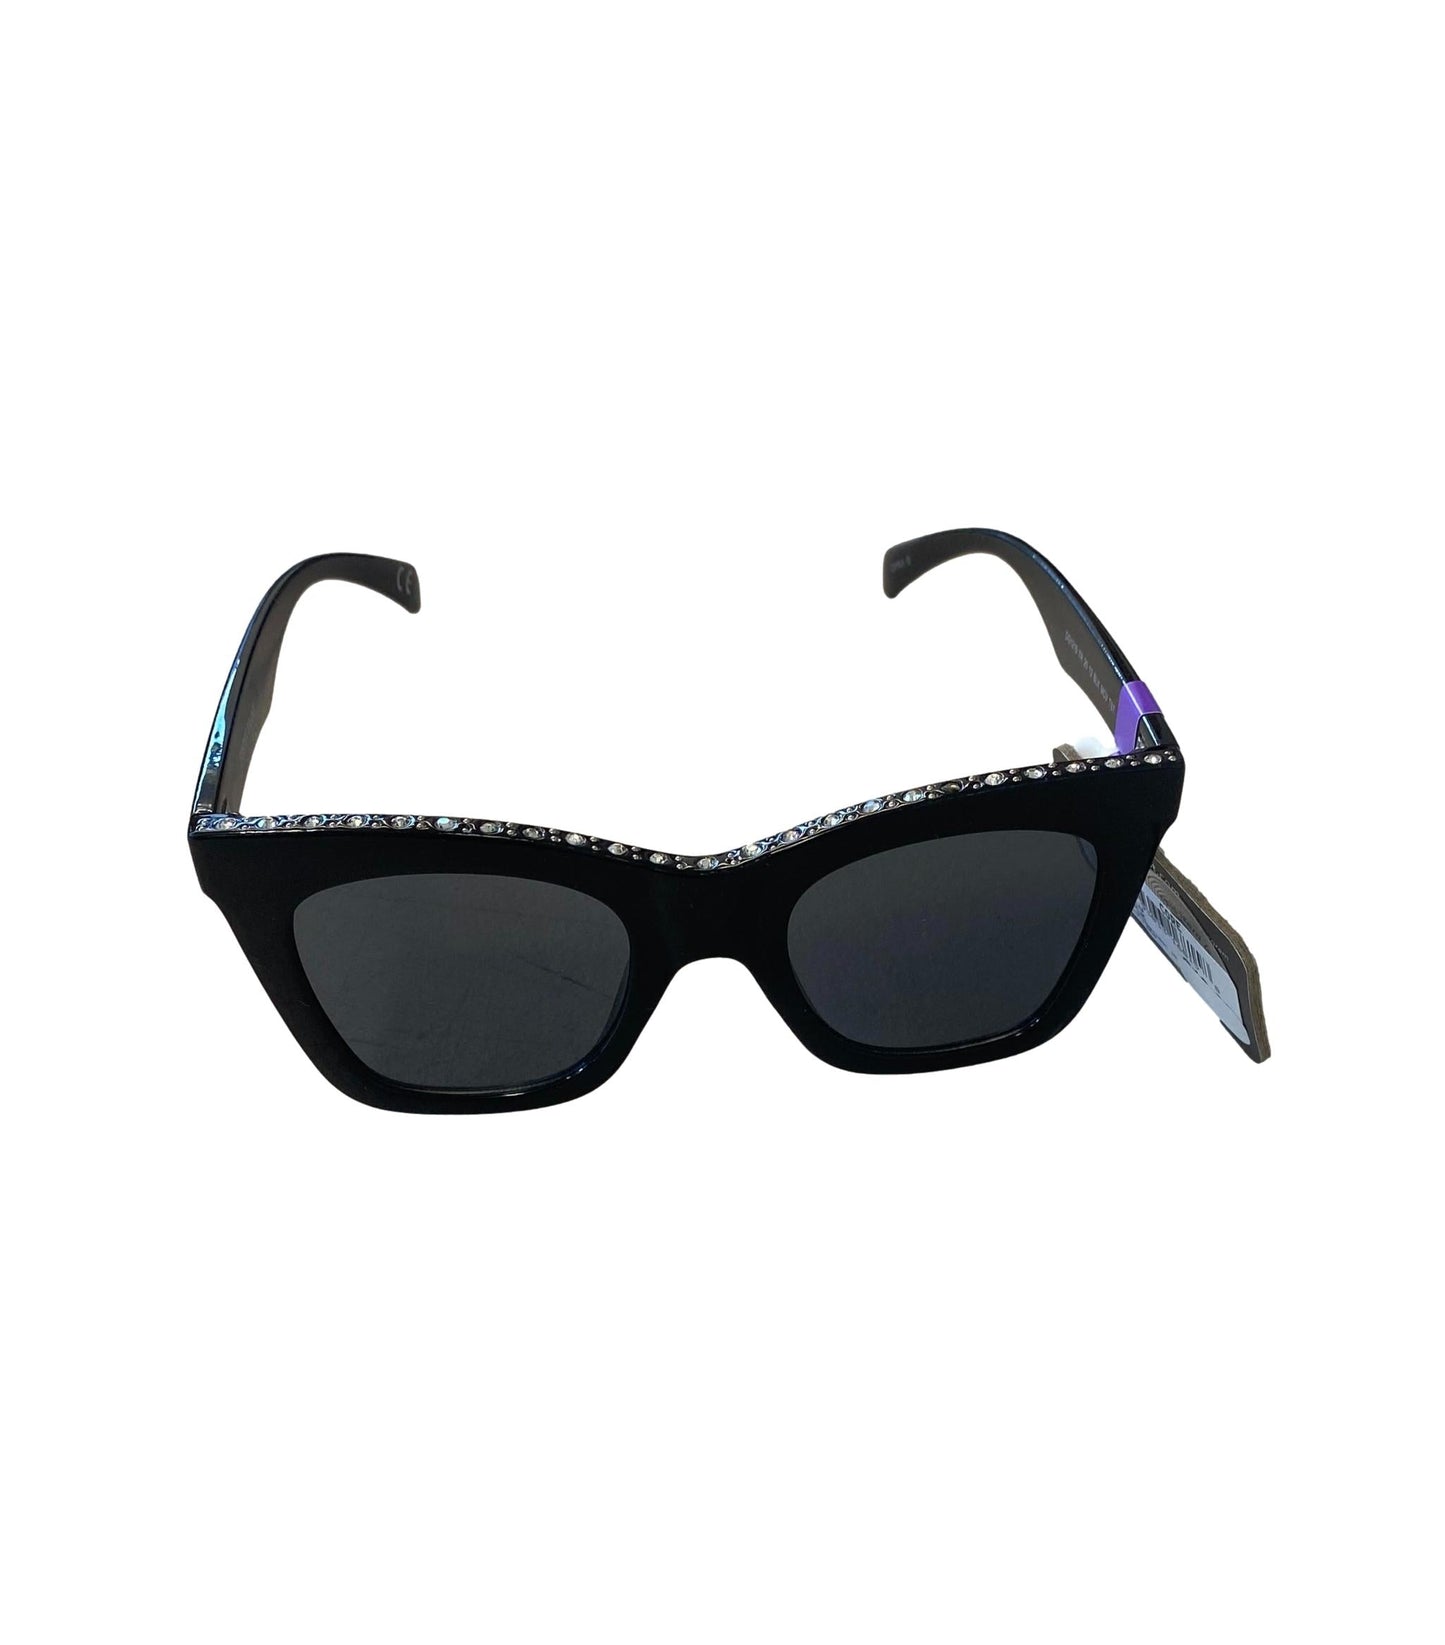 Foster Grant Sunglasses Bedazzled black cat eye NEW!